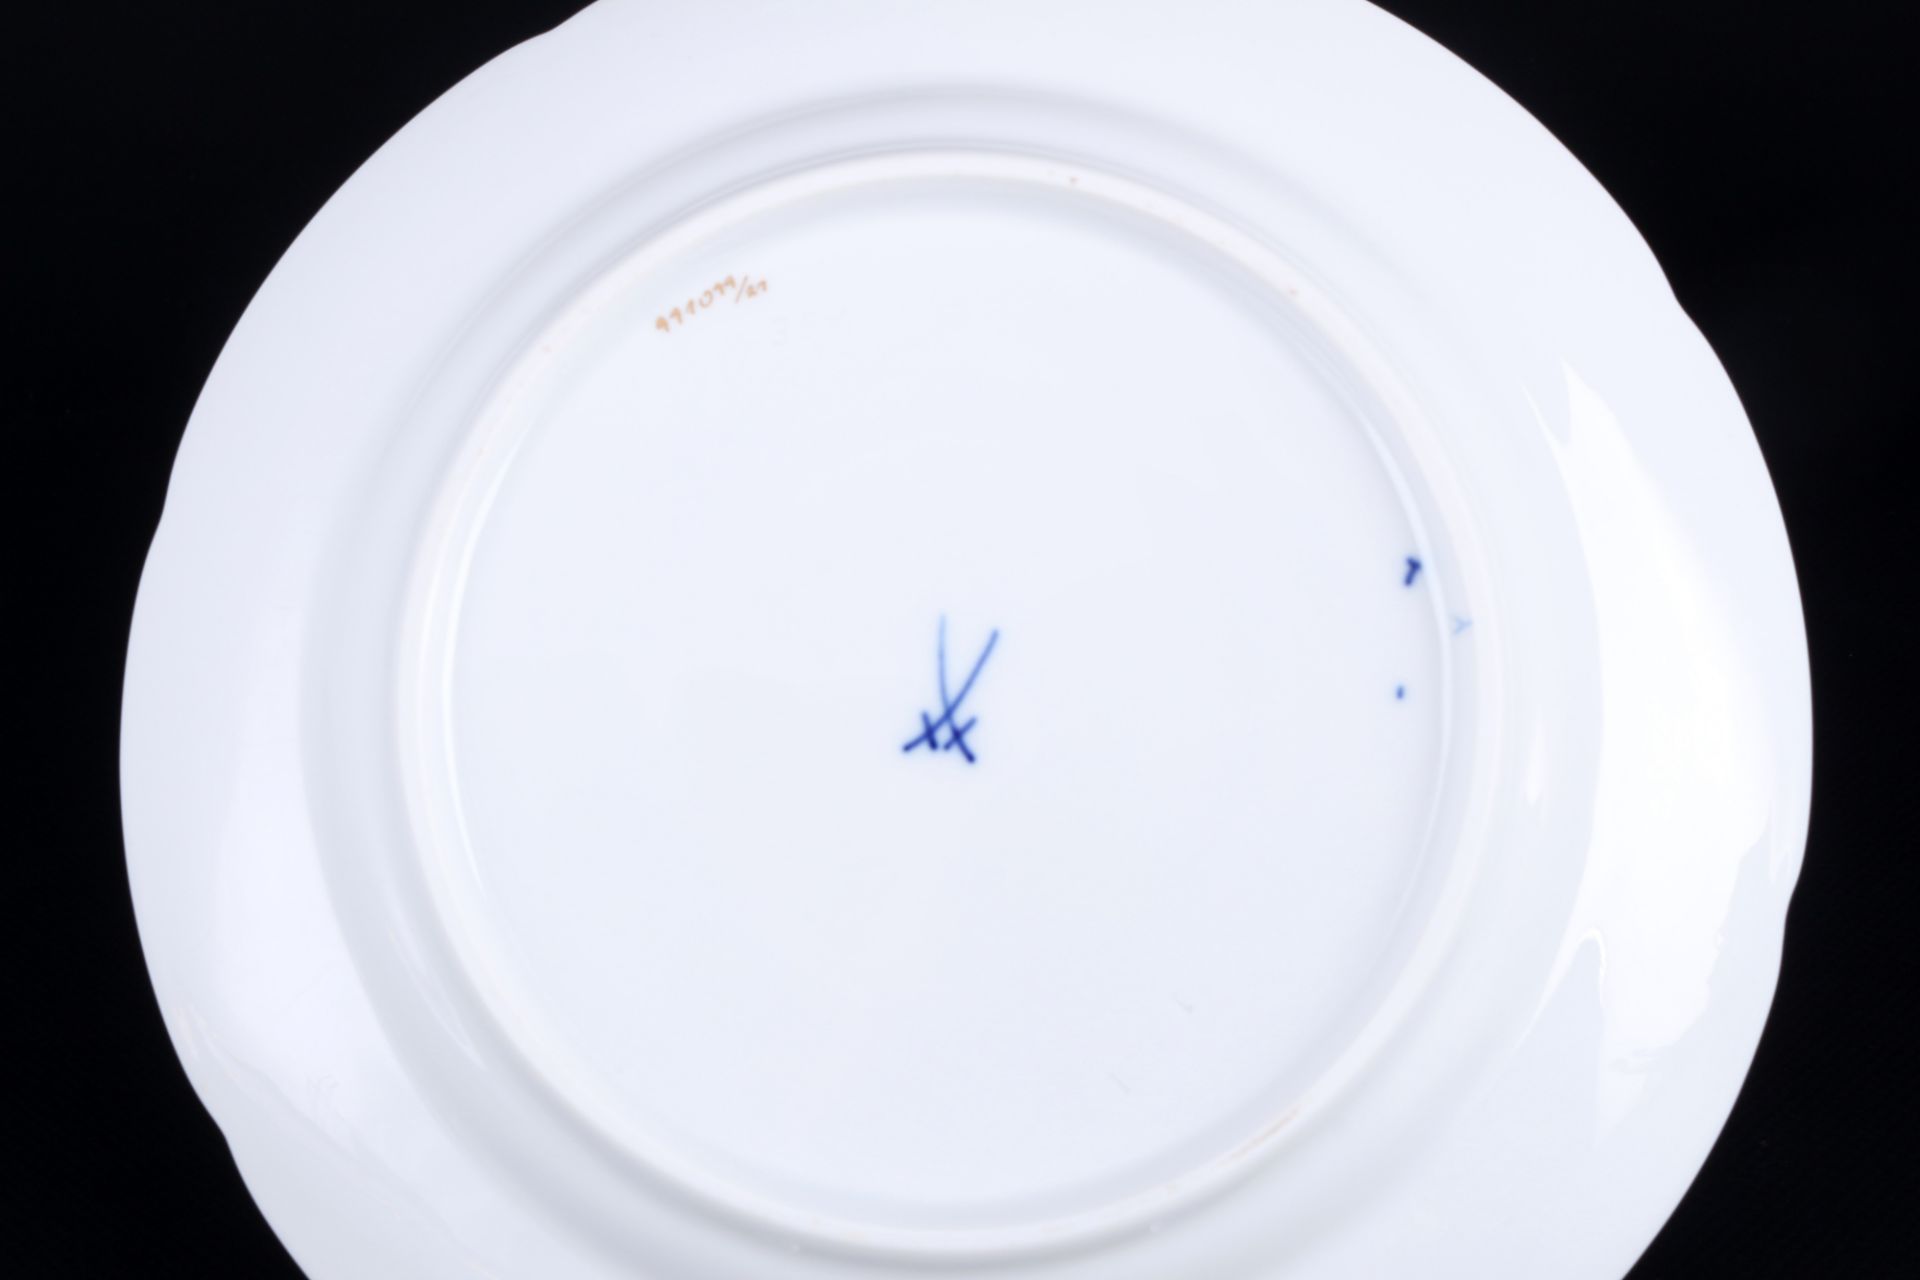 Meissen B-Form royal blue coffee dejeuner for 2 persons 1st choice, Kaffee Set für 2 Personen 1.Wahl - Image 6 of 8